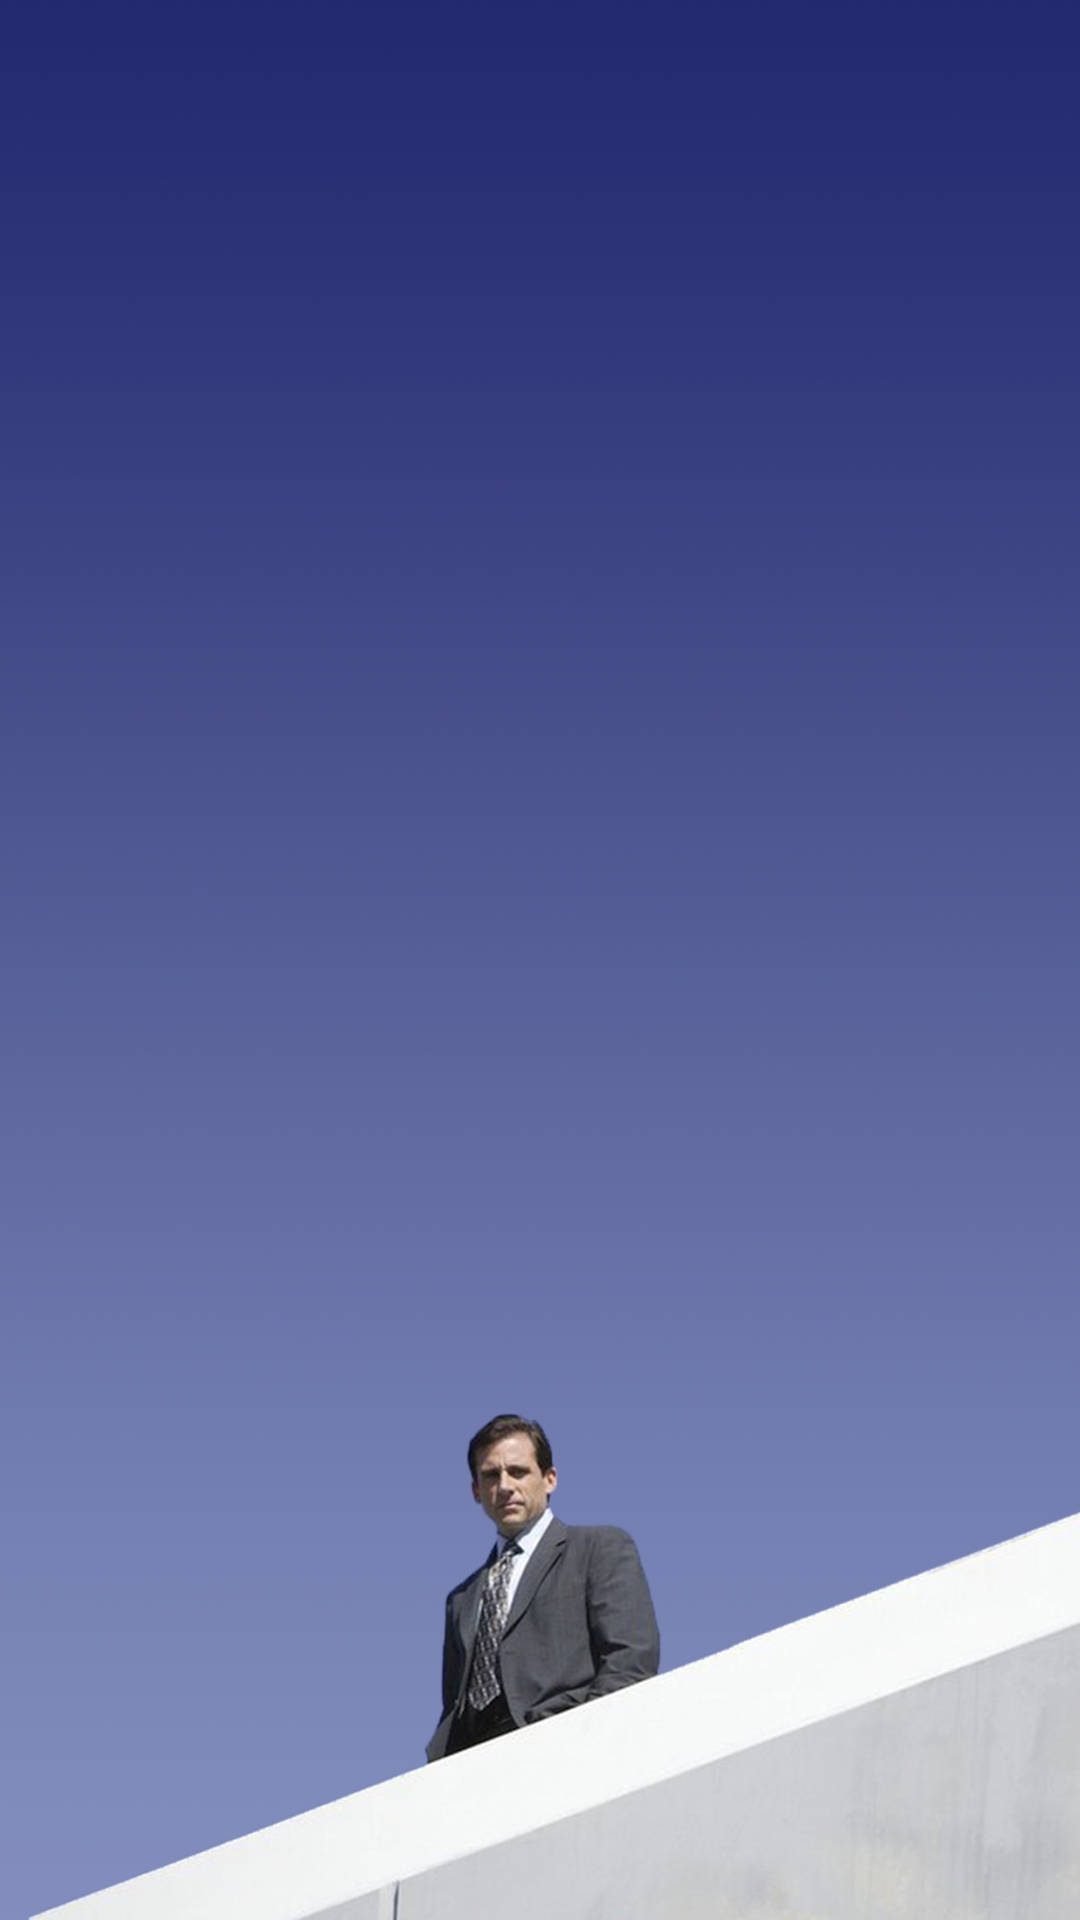 Michael Scott takes time for a moment of reflection Wallpaper